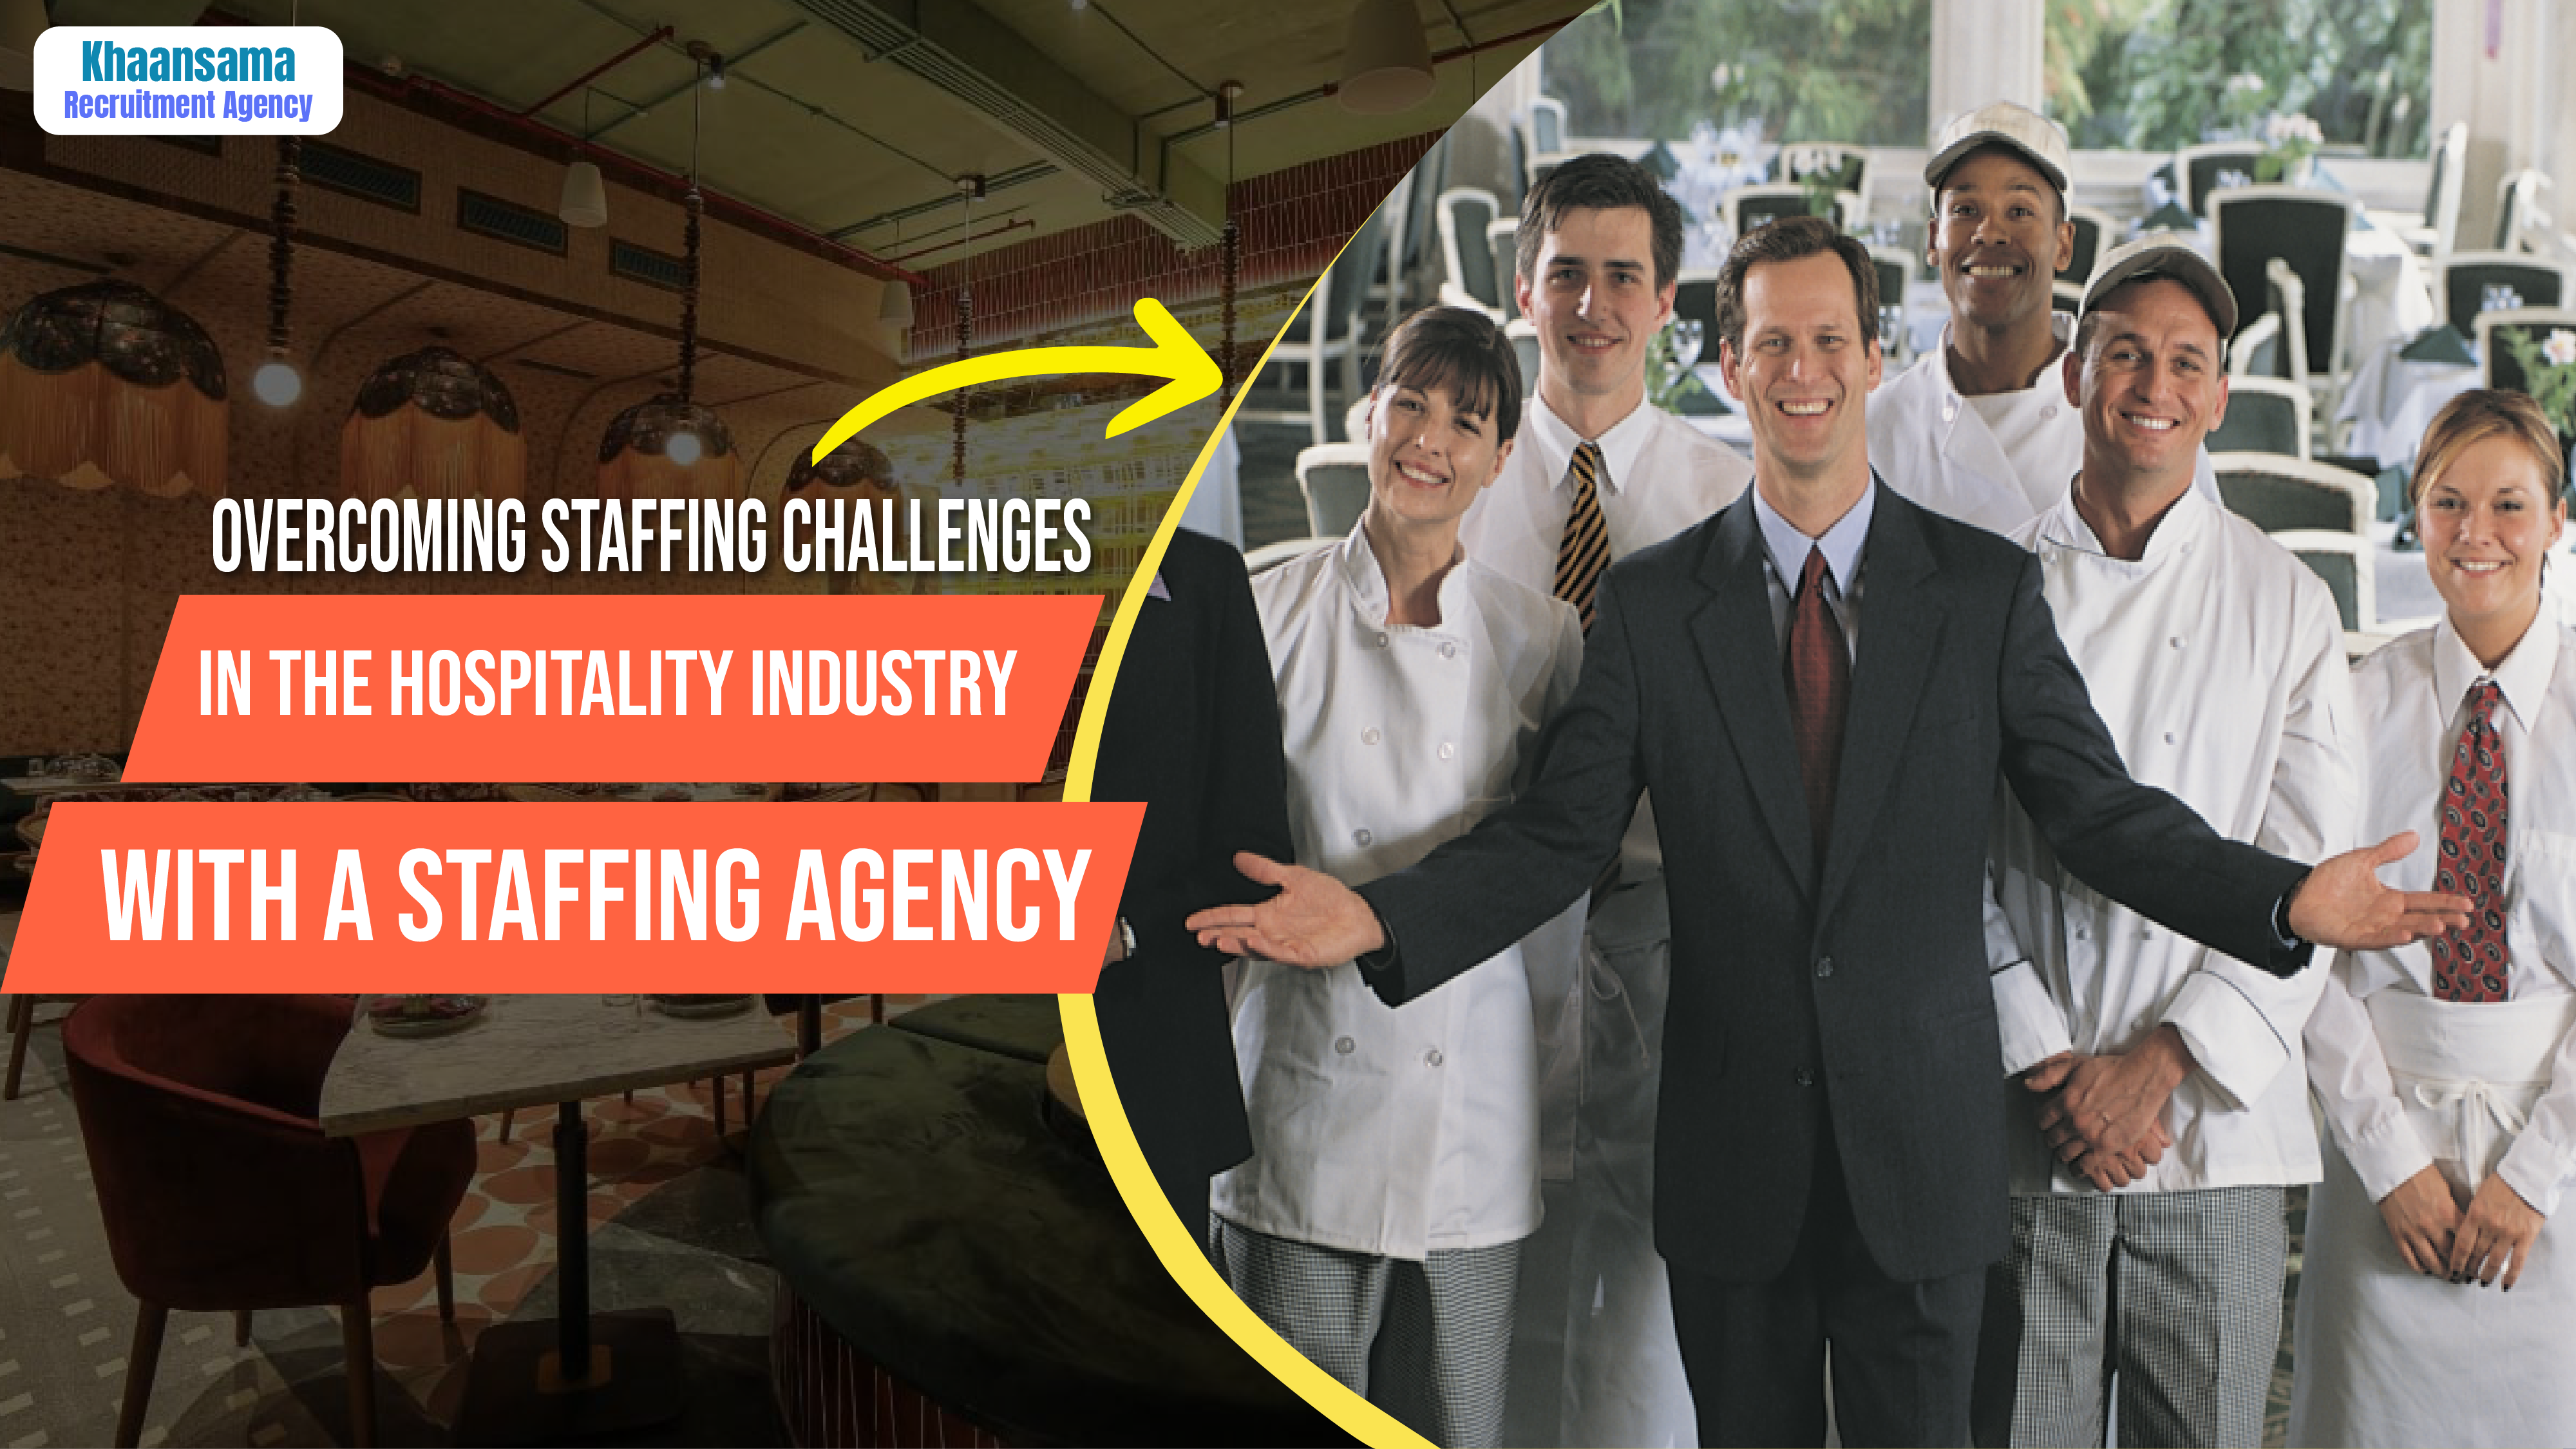 Overcoming Staffing Challenges in the Hospitality Industry with a Staffing Agency